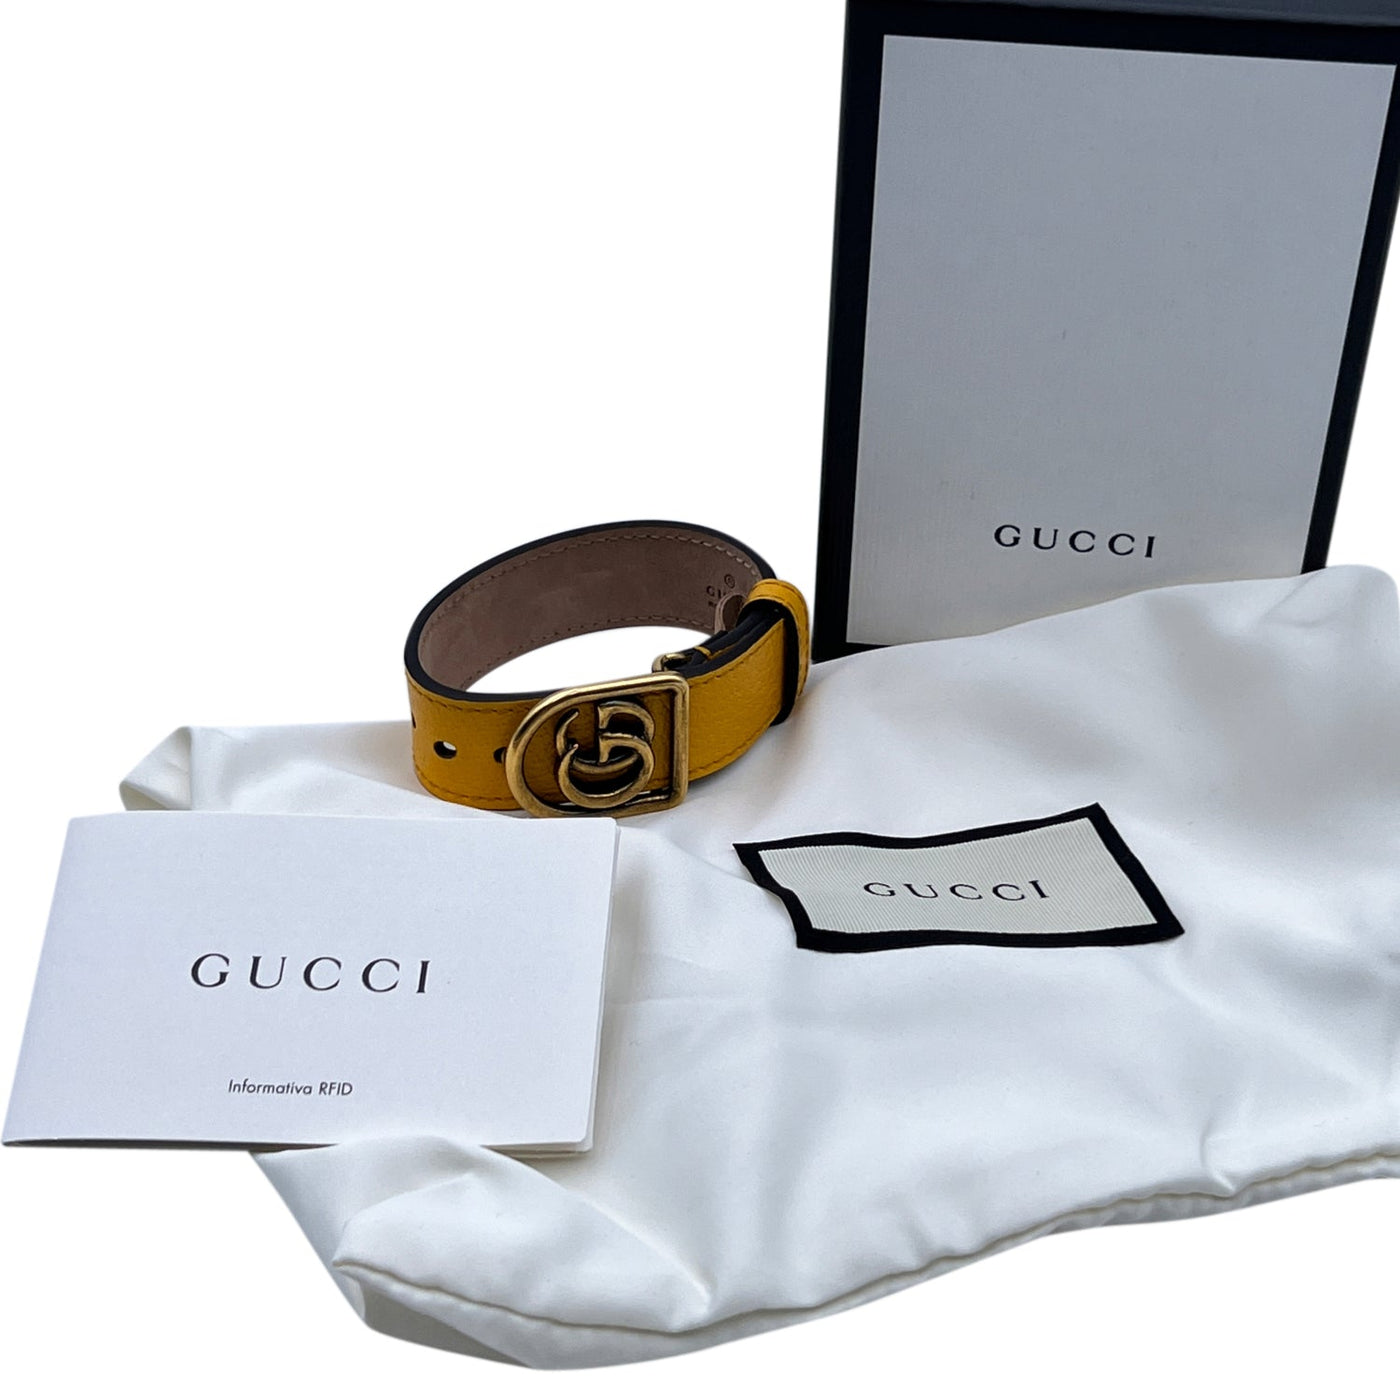 Gucci Marmont Belt Archives - Fashion Addicted